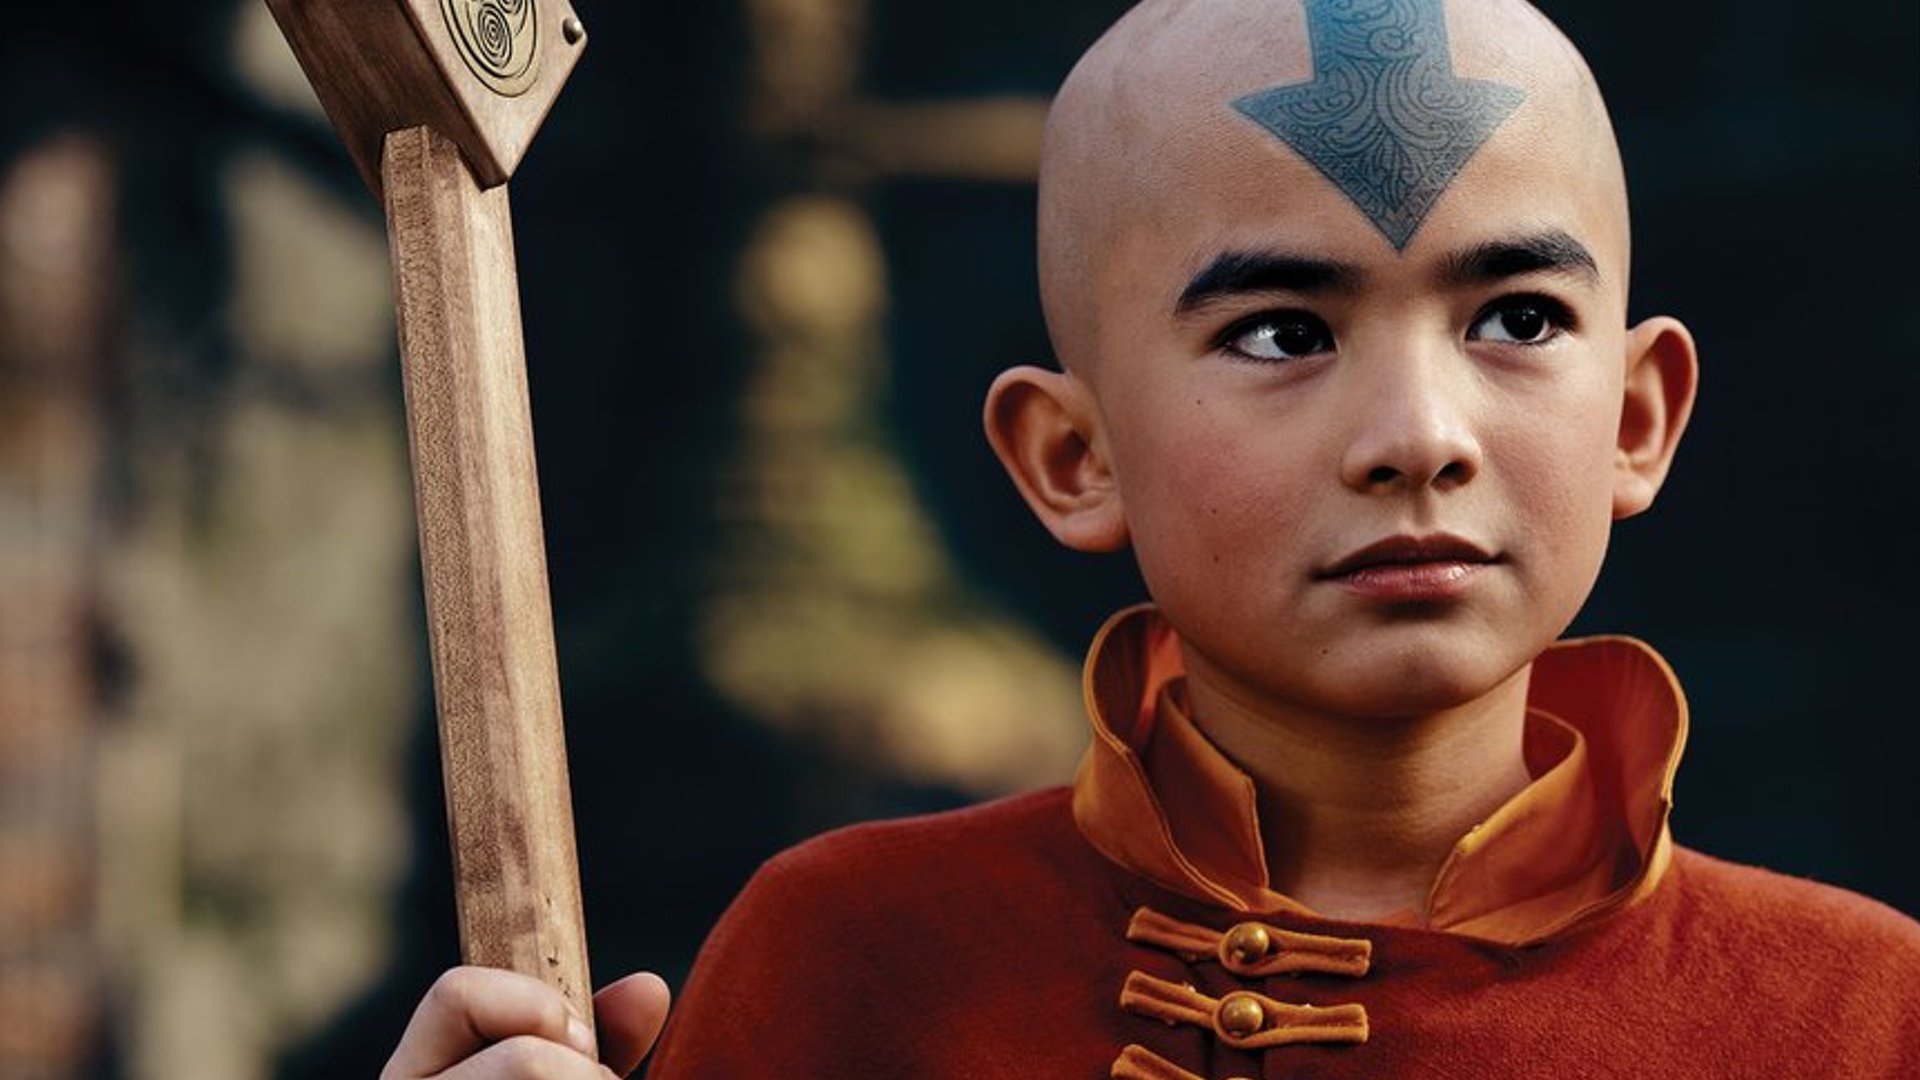 ‘Avatar: The Last Airbender’ Trailer: The Journey To Restore Balance To The World Begins This Week On Netflix